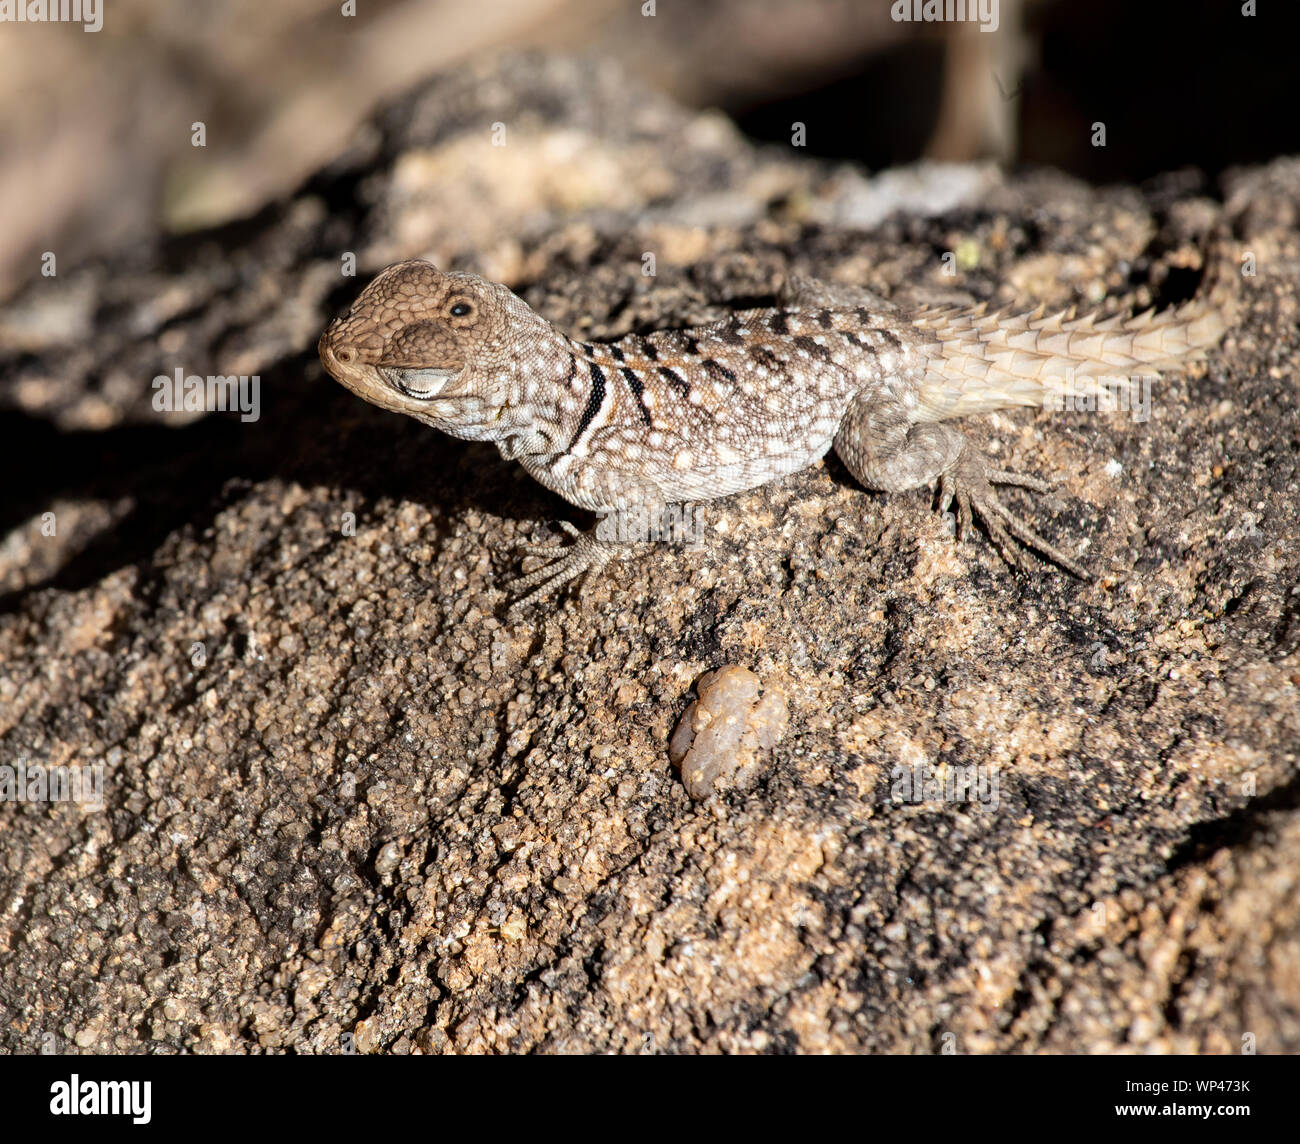 Endemic endangered Madagascan Spiny Tailed Lizard, Opulurus cuvieri, with a prominant third , pineal, eye on the head and strong spiny tail.  On a sun Stock Photo